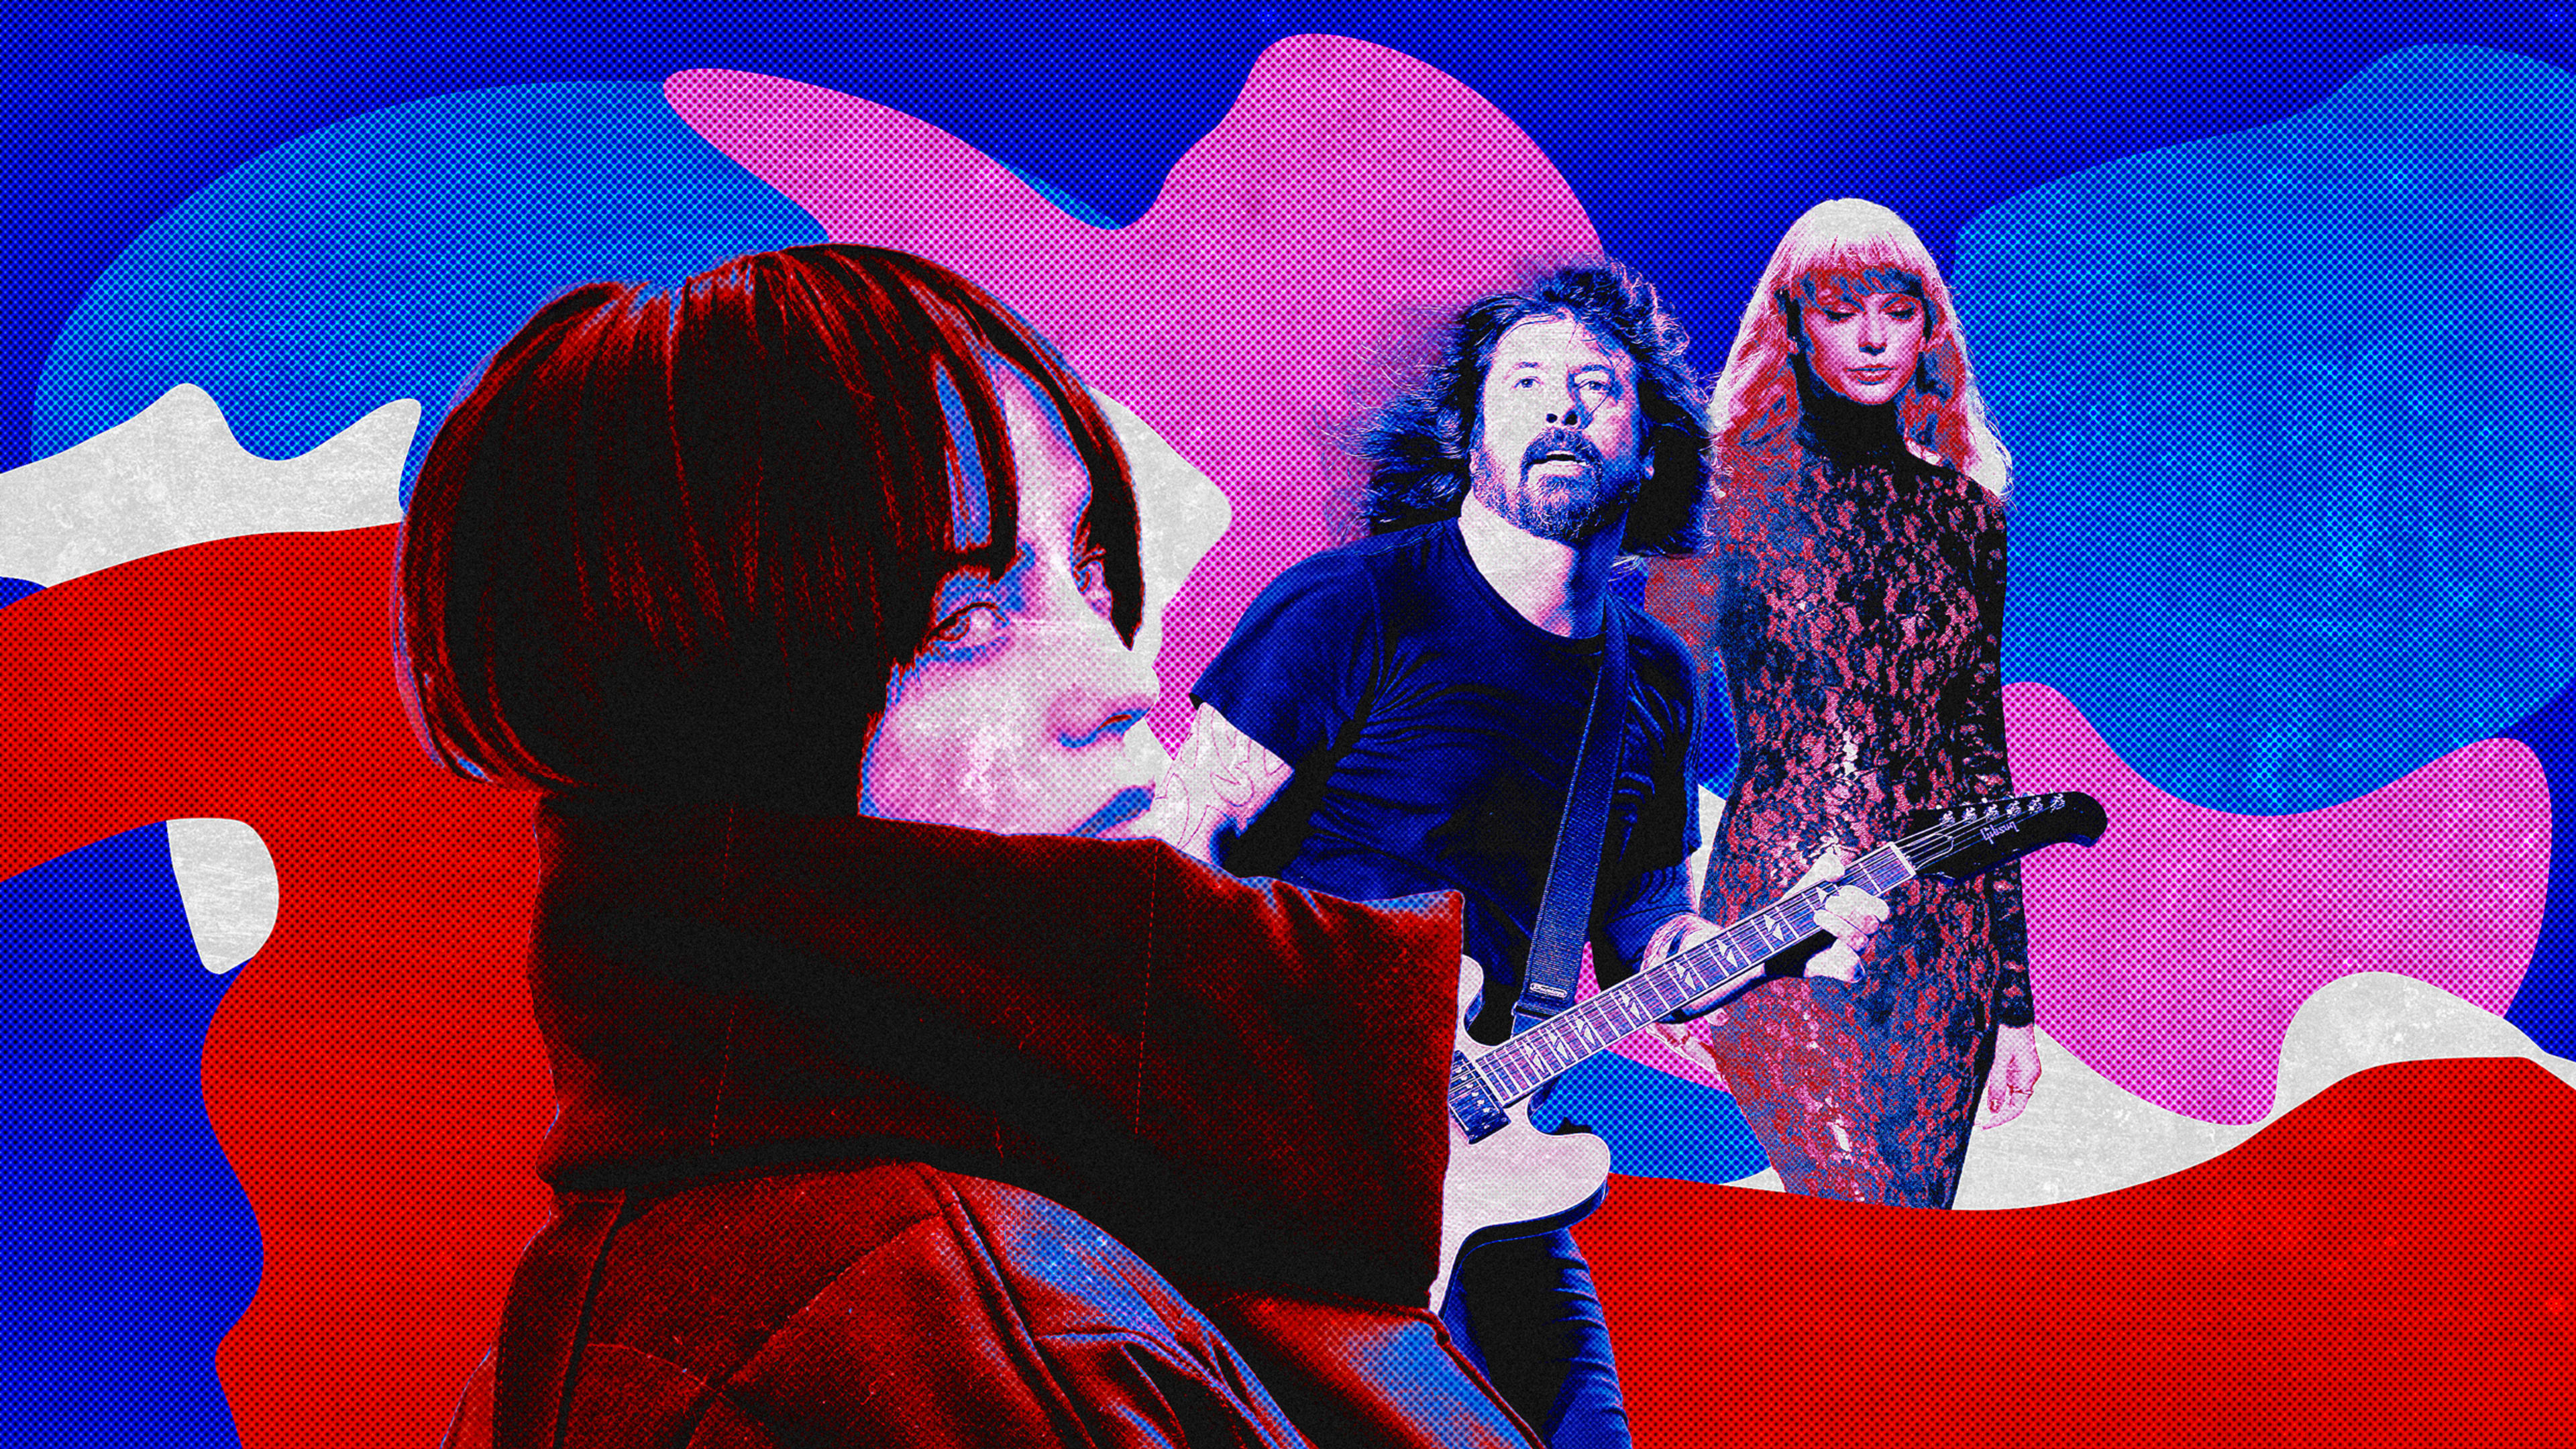 Trying to build your brand? Steal secrets from Billie Eilish, Taylor Swift, and the Foo Fighters